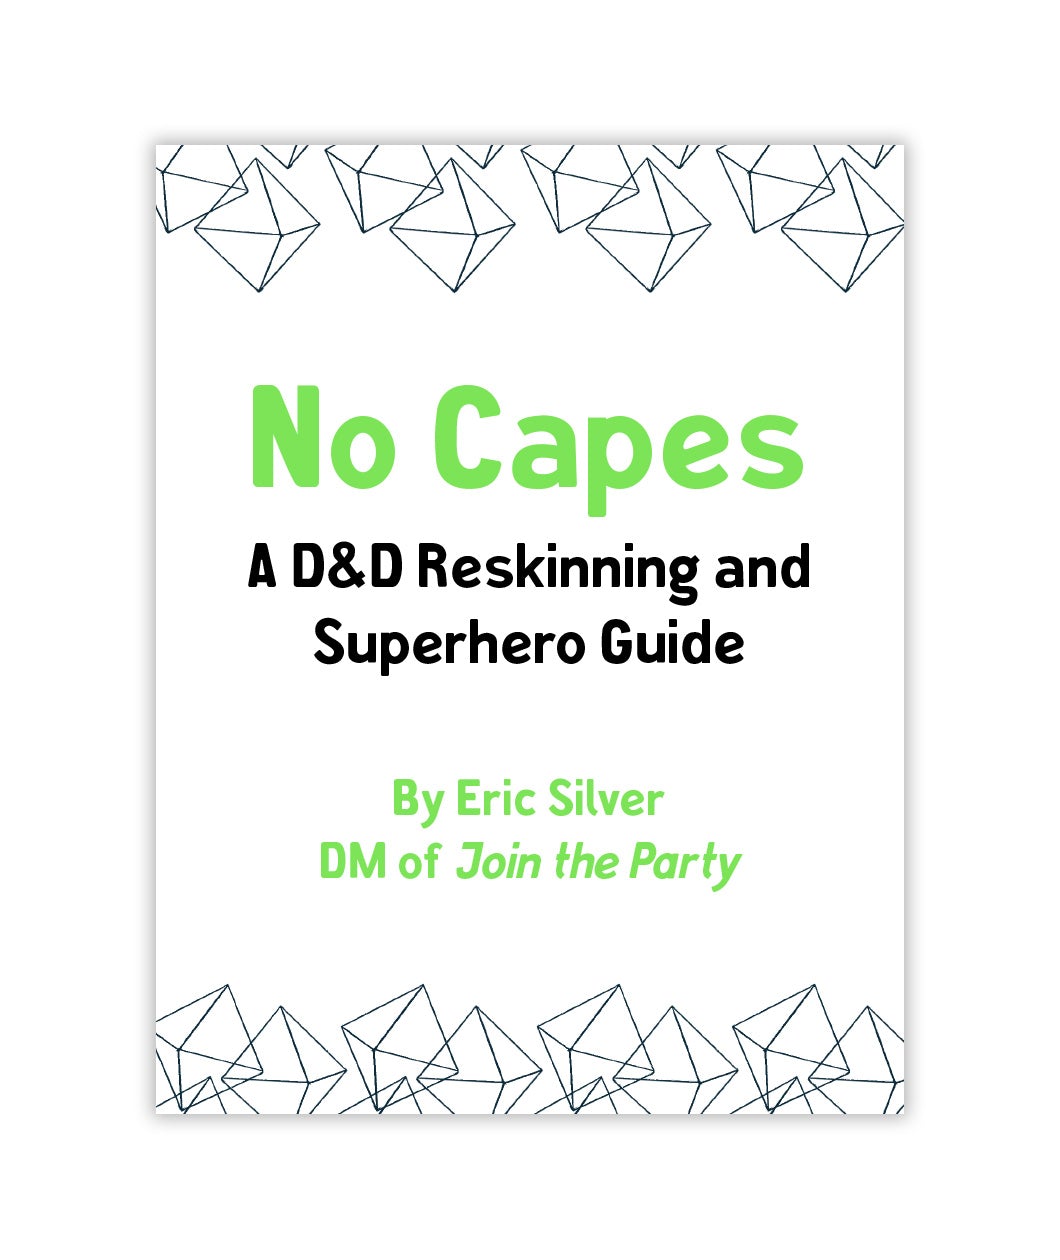 No Capes: A D&D Reskinning and Superhero Guide - Patreon Price